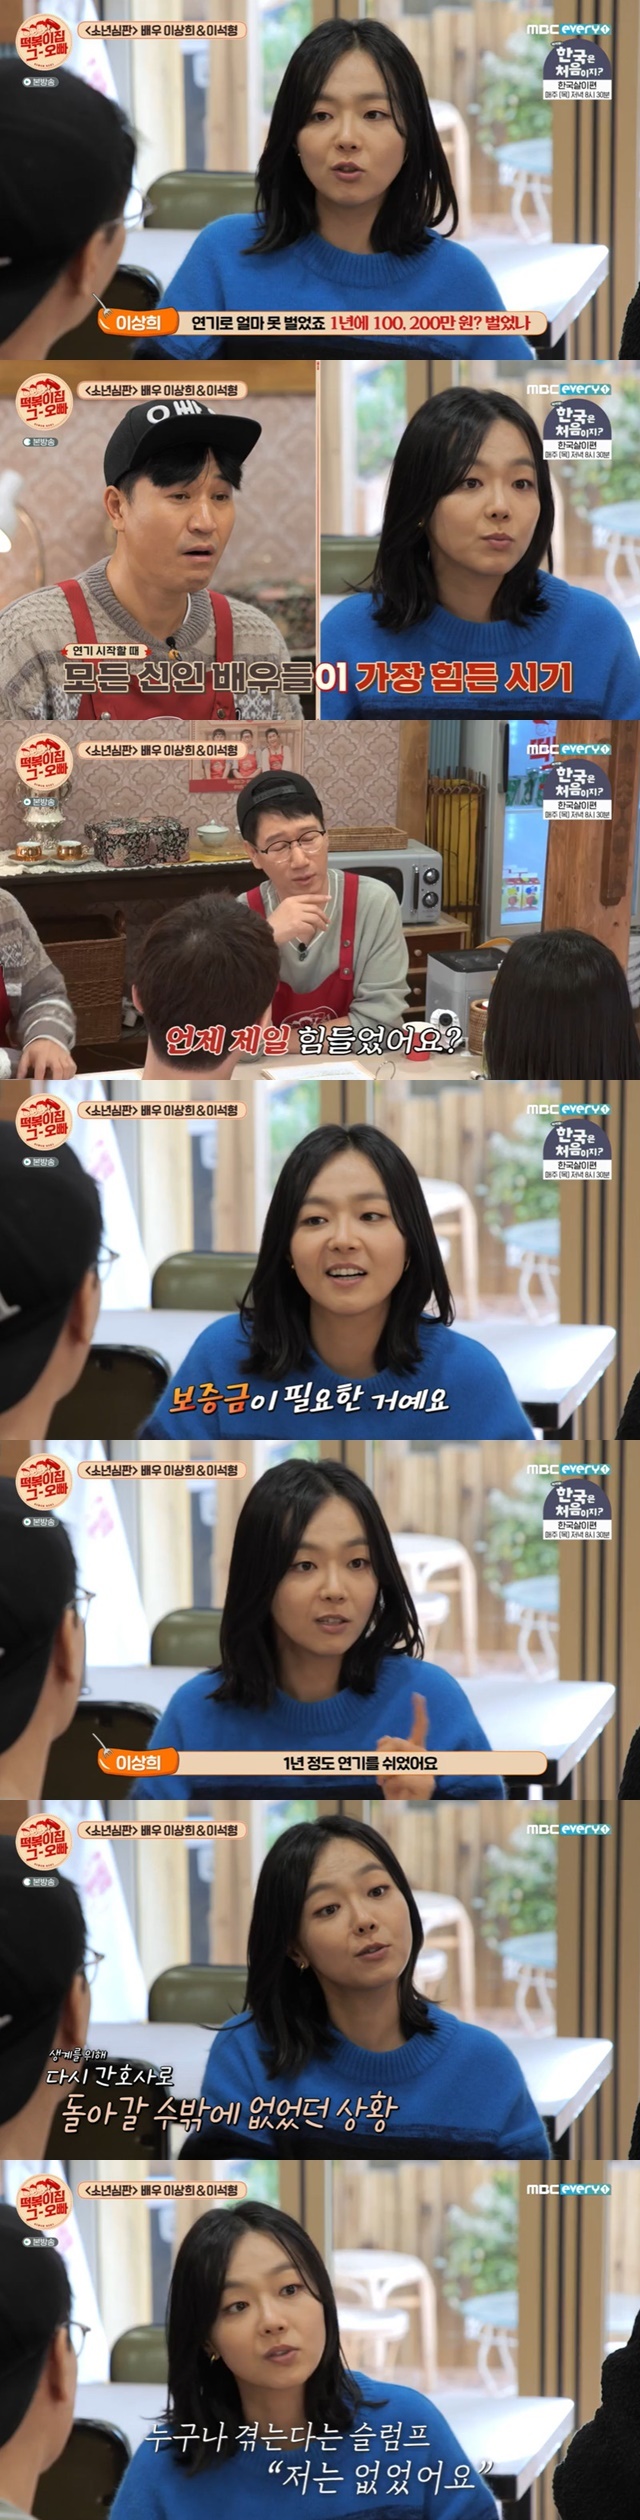 Lee Sang-hee said she had become an actor in a nurse and then worked as a nurse again.MBC Everlons Teokbokki house brother, which was broadcast on March 29, featured Boy Judge actors Lee Sang-hee and Lee Seok-hyung.On the day of the show, Lee Sang-hee said, I was a nurse before. I worked at a university hospital for a while.I was interested in acting, but I didnt quit to act, he said. I was interested in acting, but I didnt quit to act.Lee Sang-hee then said, My best friend was a film department at Sangmyung University. I saw making movies.I quit the hospital and acted, and Friend worked for an advertising company and then studied nursing assistants again.He went to the hospital, he surprised everyone by telling Friend about his reversed job.Lee Sang-hee said, I earned a little less than acting. I earned 1 million won a year and 2 million won a year.I was living in a friend house with the hardest Sigi, saying that I was making money from acting. As Friend became marriage, I needed a deposit.I had a year off because I couldnt get a deposit when I was in the day job, said Sigi, who had been acting to collect the deposit.